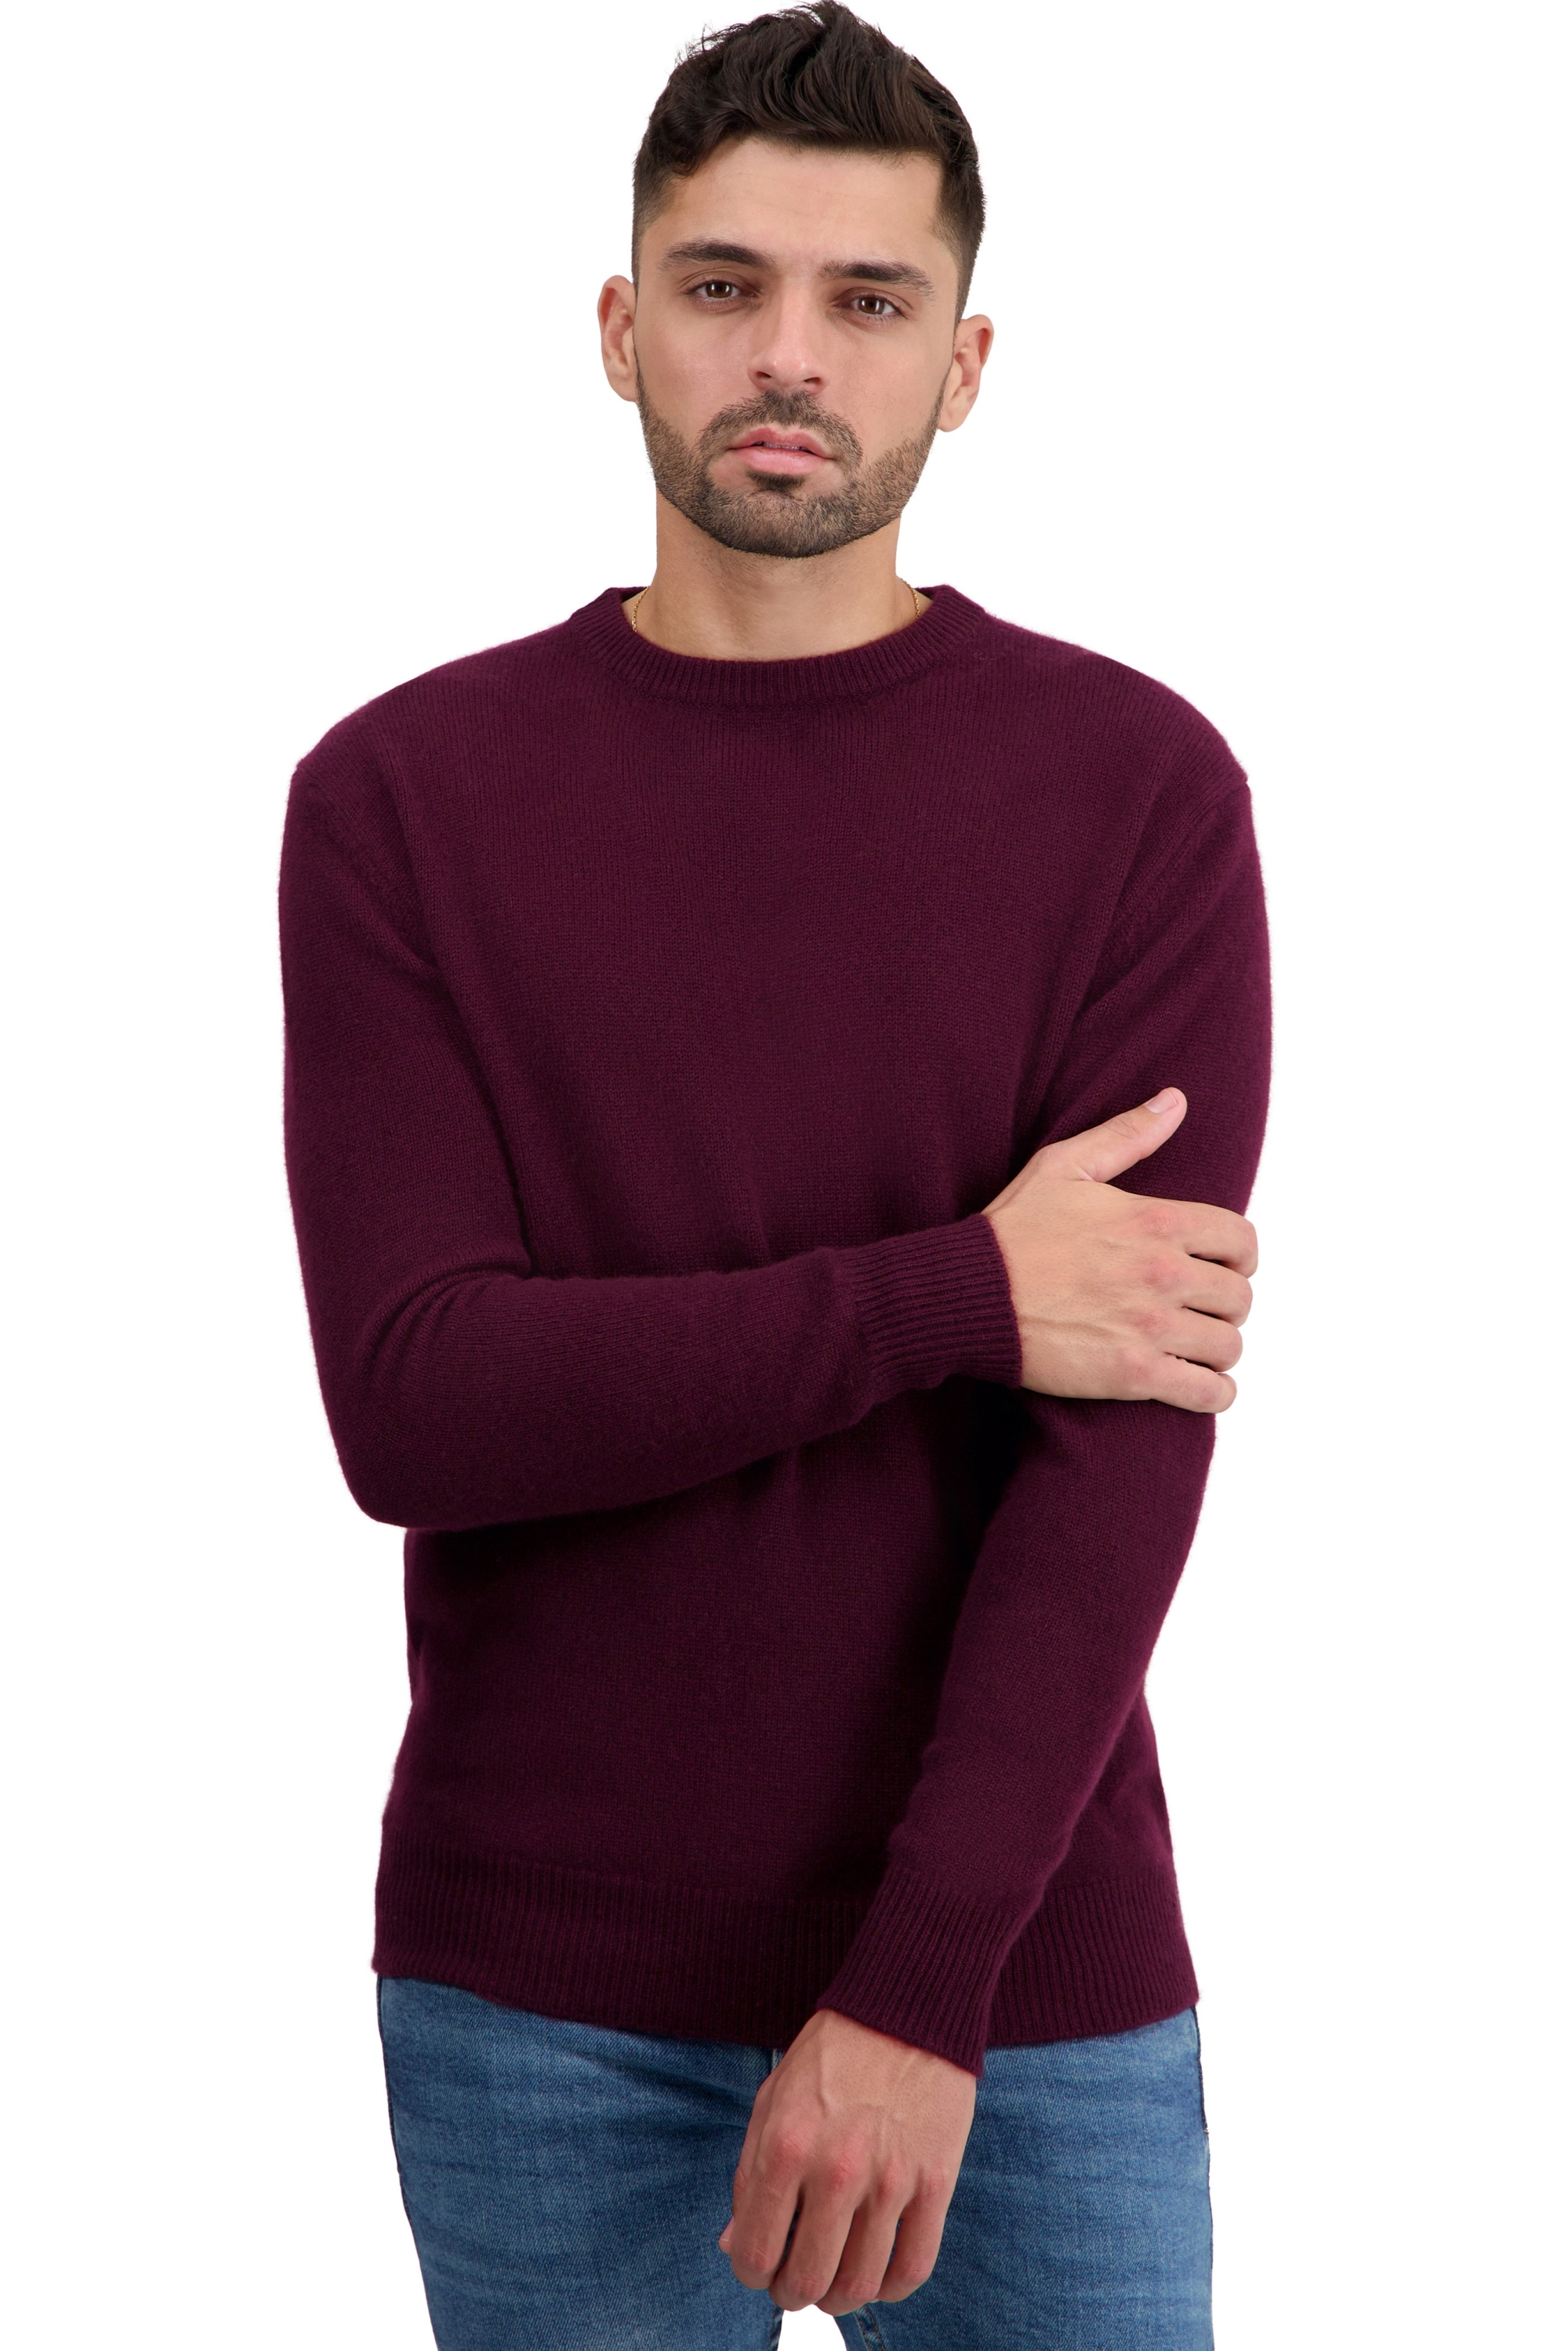 Cashmere men basic sweaters at low prices touraine first bordeaux s